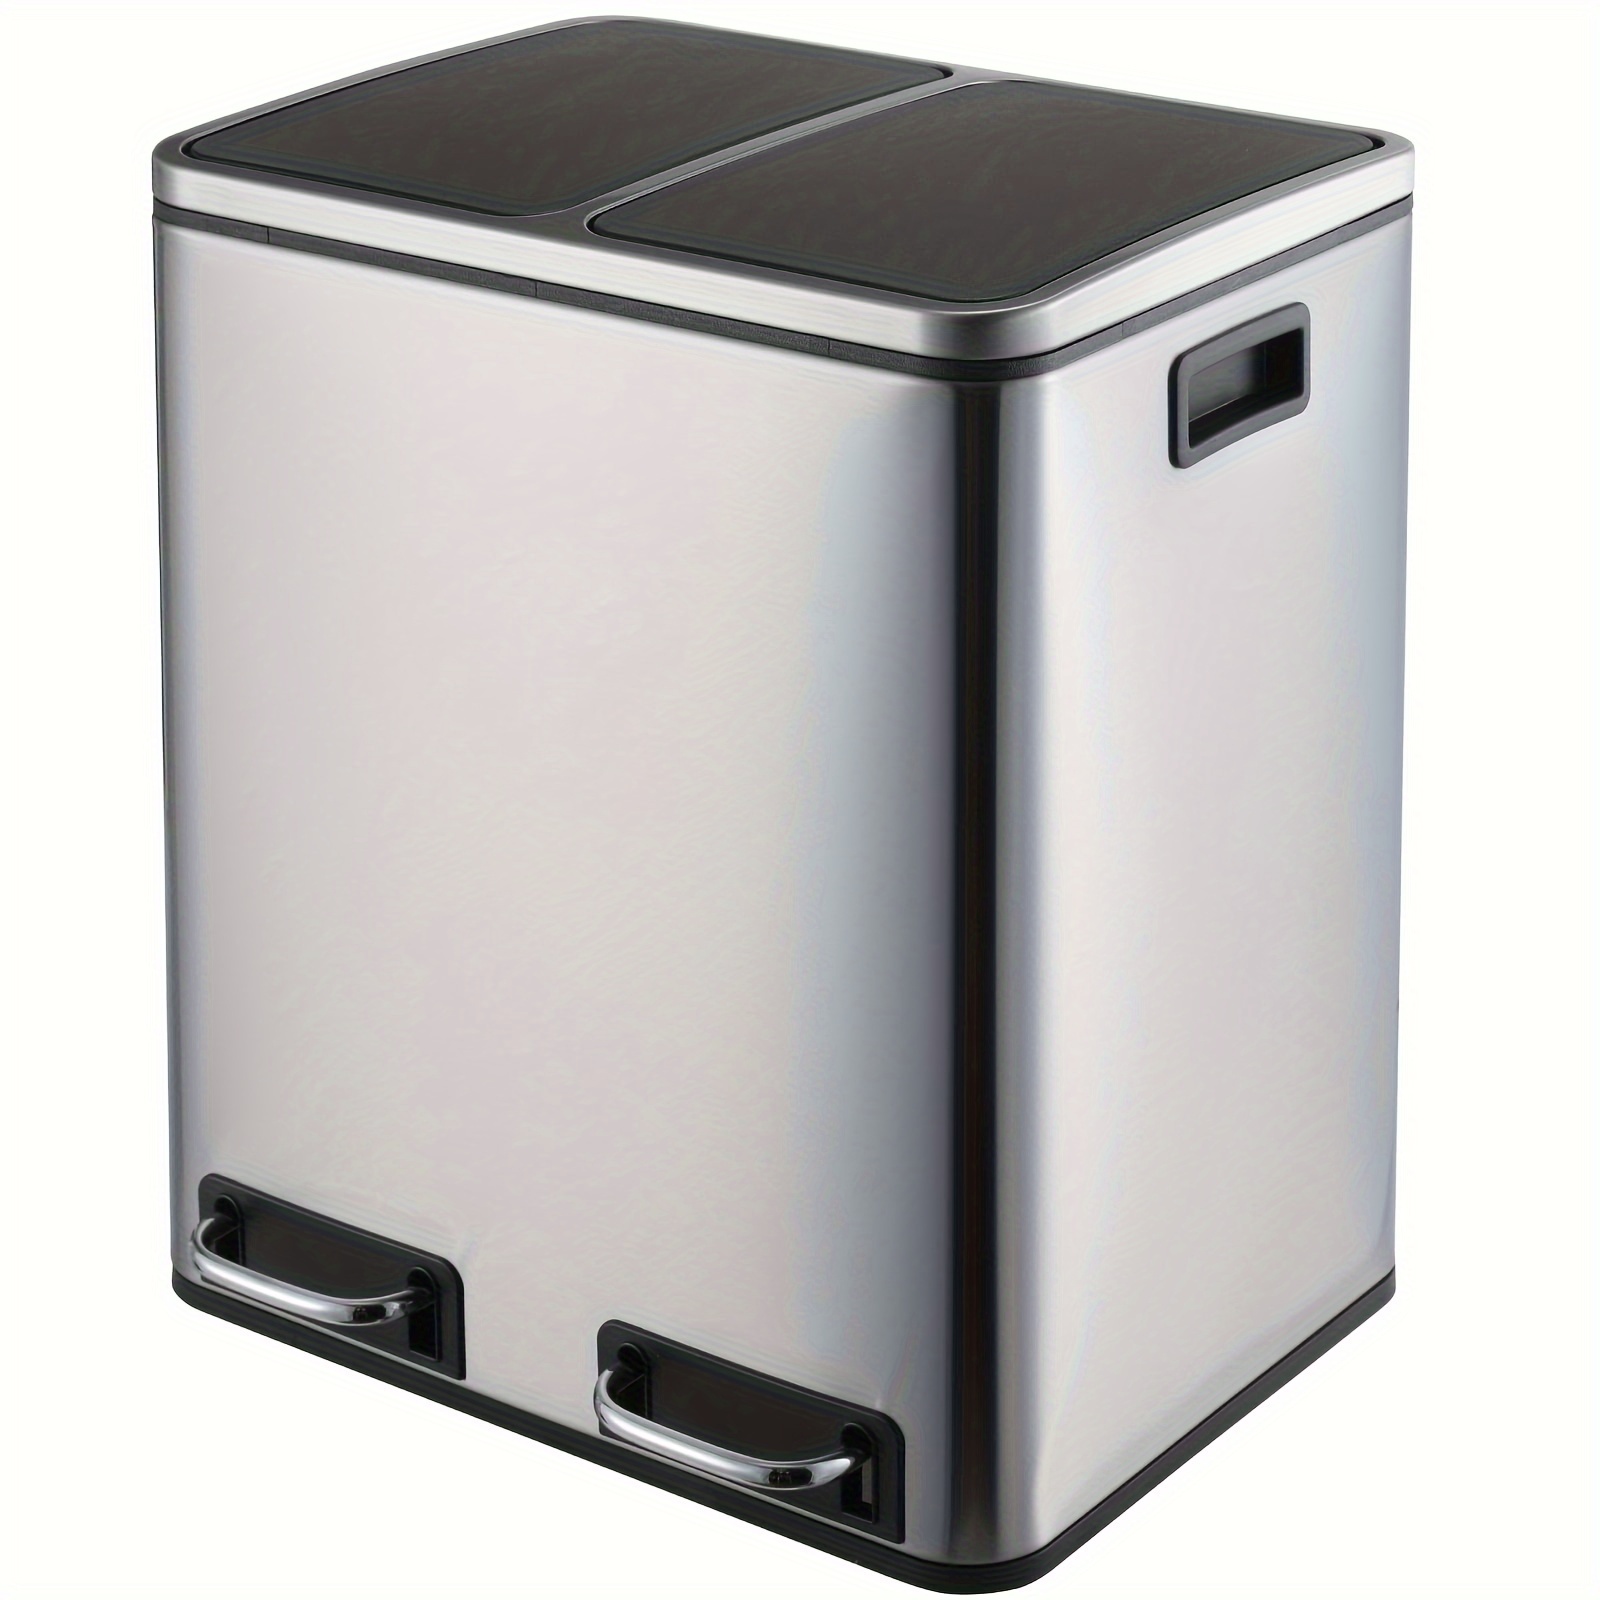 

8 Gallon Dual Trash Can, 30l Stainless Steel Kitchen Garbage Can, Step-on Classified Recycle Garbage Bin With Removable Inner Buckets, For Kitchen, Living Room, Office